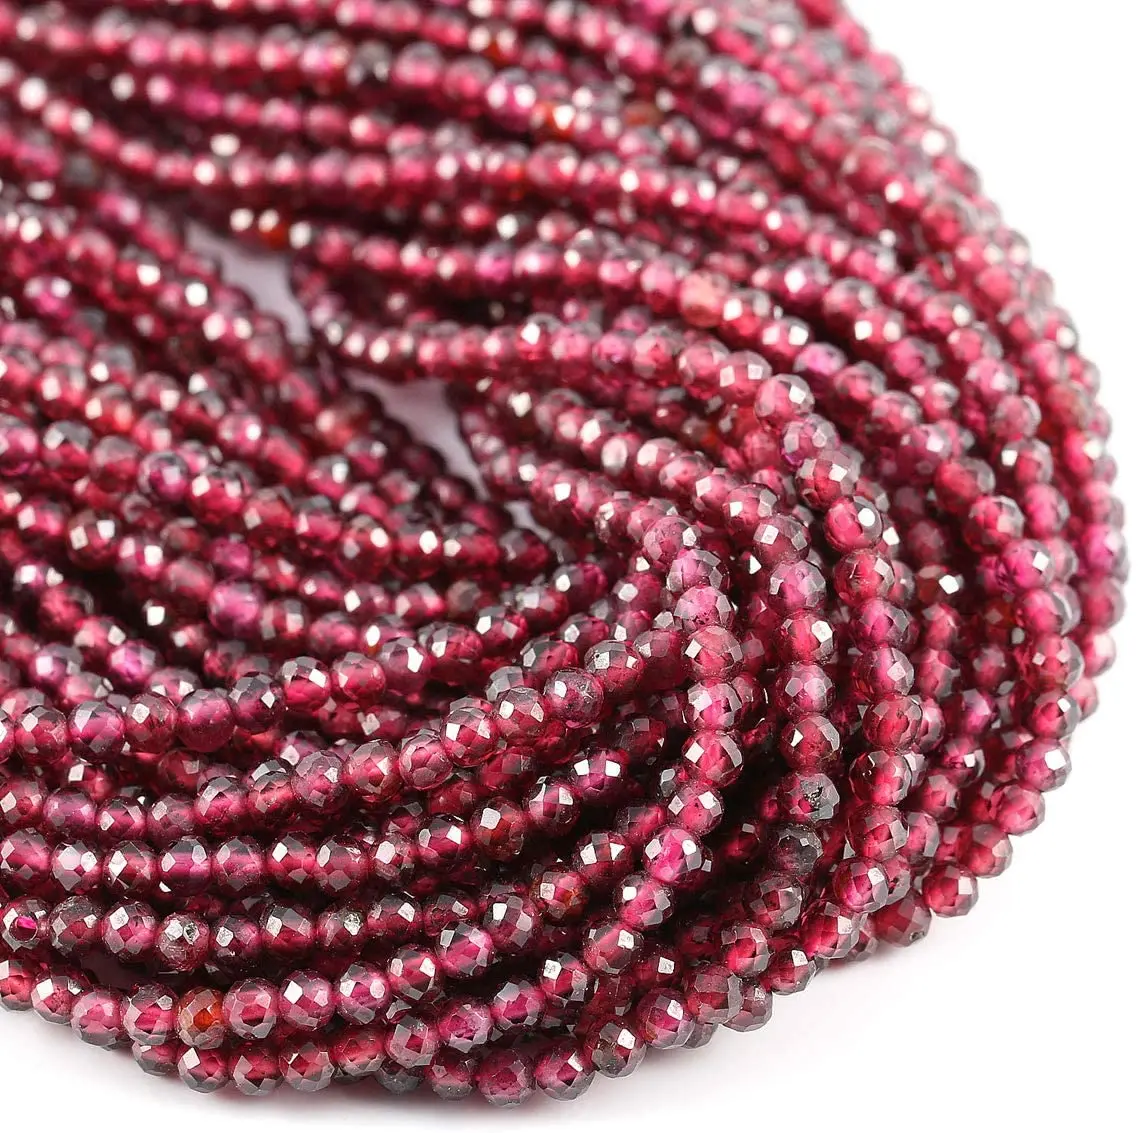 1pcs 2MM Rose spinel Faceted Gemstone Loose bead 15" Wholesale Styles Craft DIY 